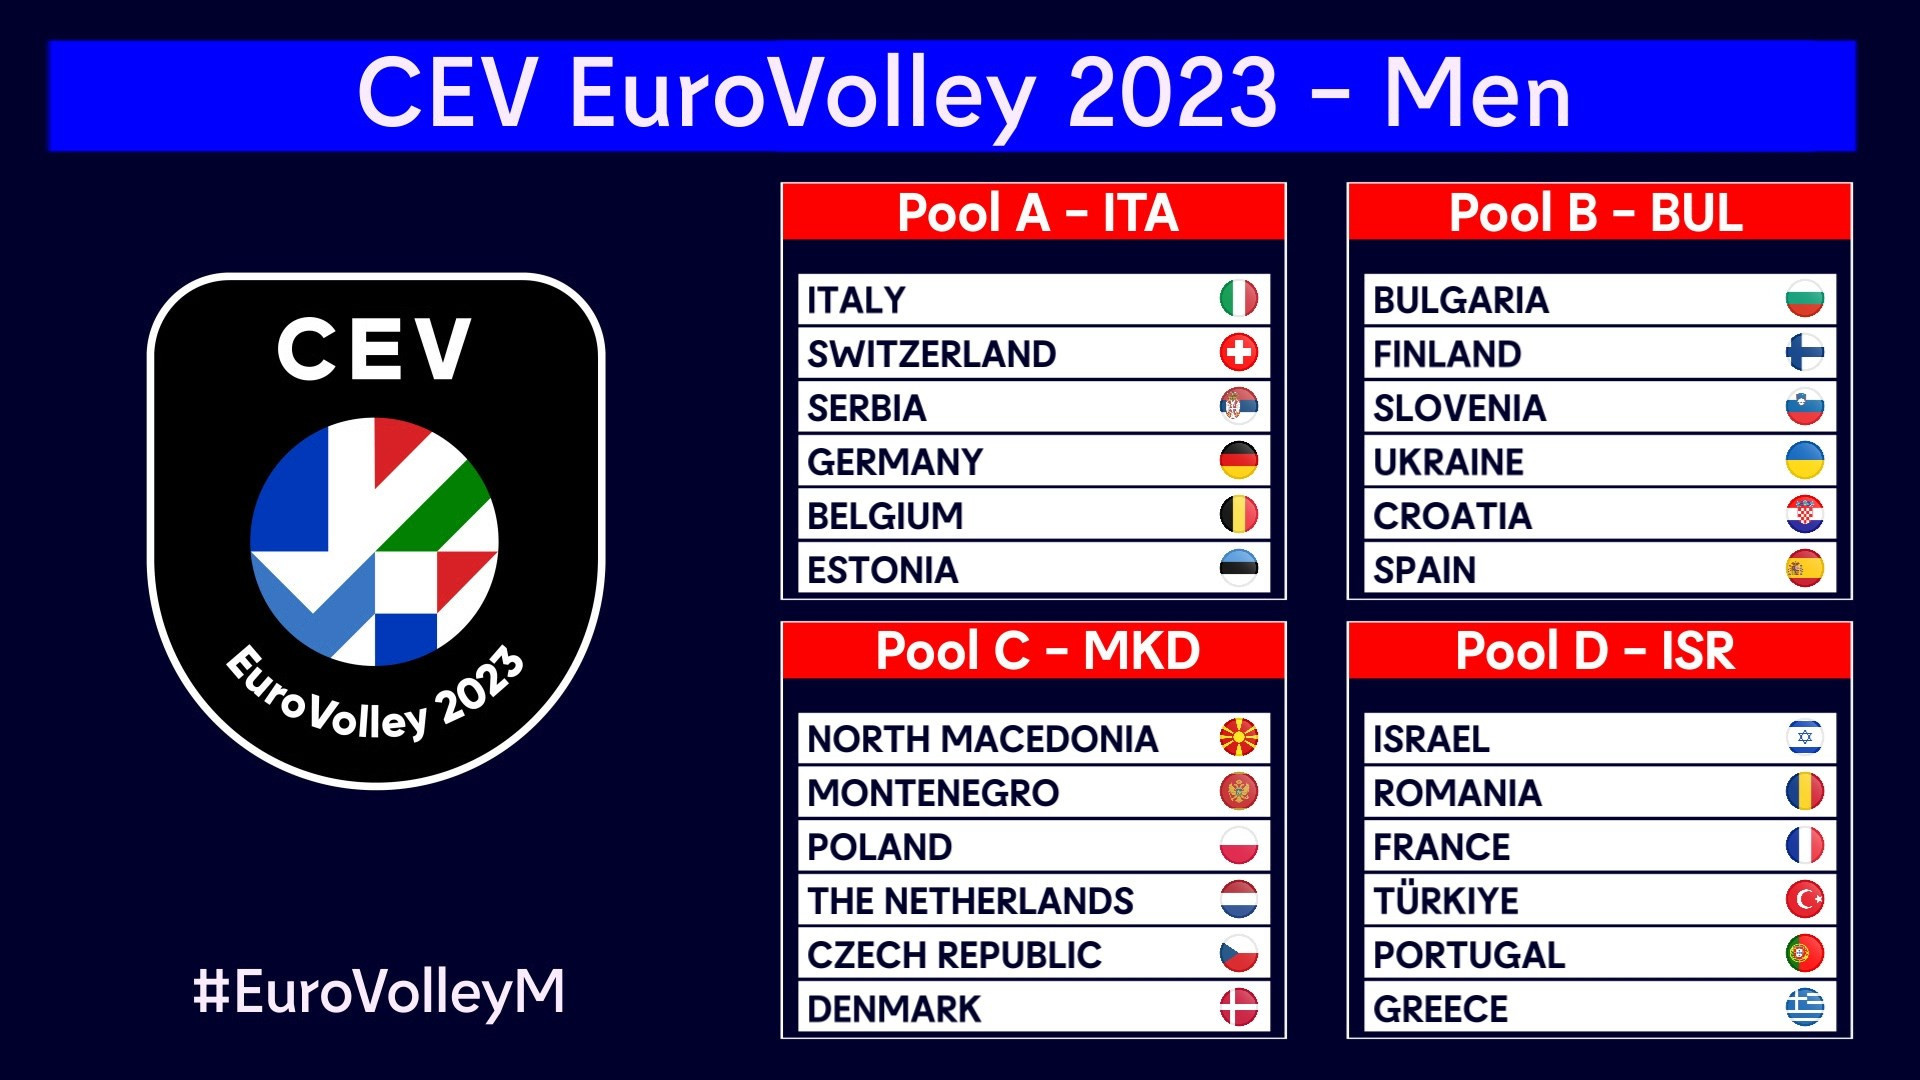 Italy chose to have Switzerland included in their pool and are also set to meet Serbia, Germany, Belgium, and Estonia in next year's tournament ©CEV